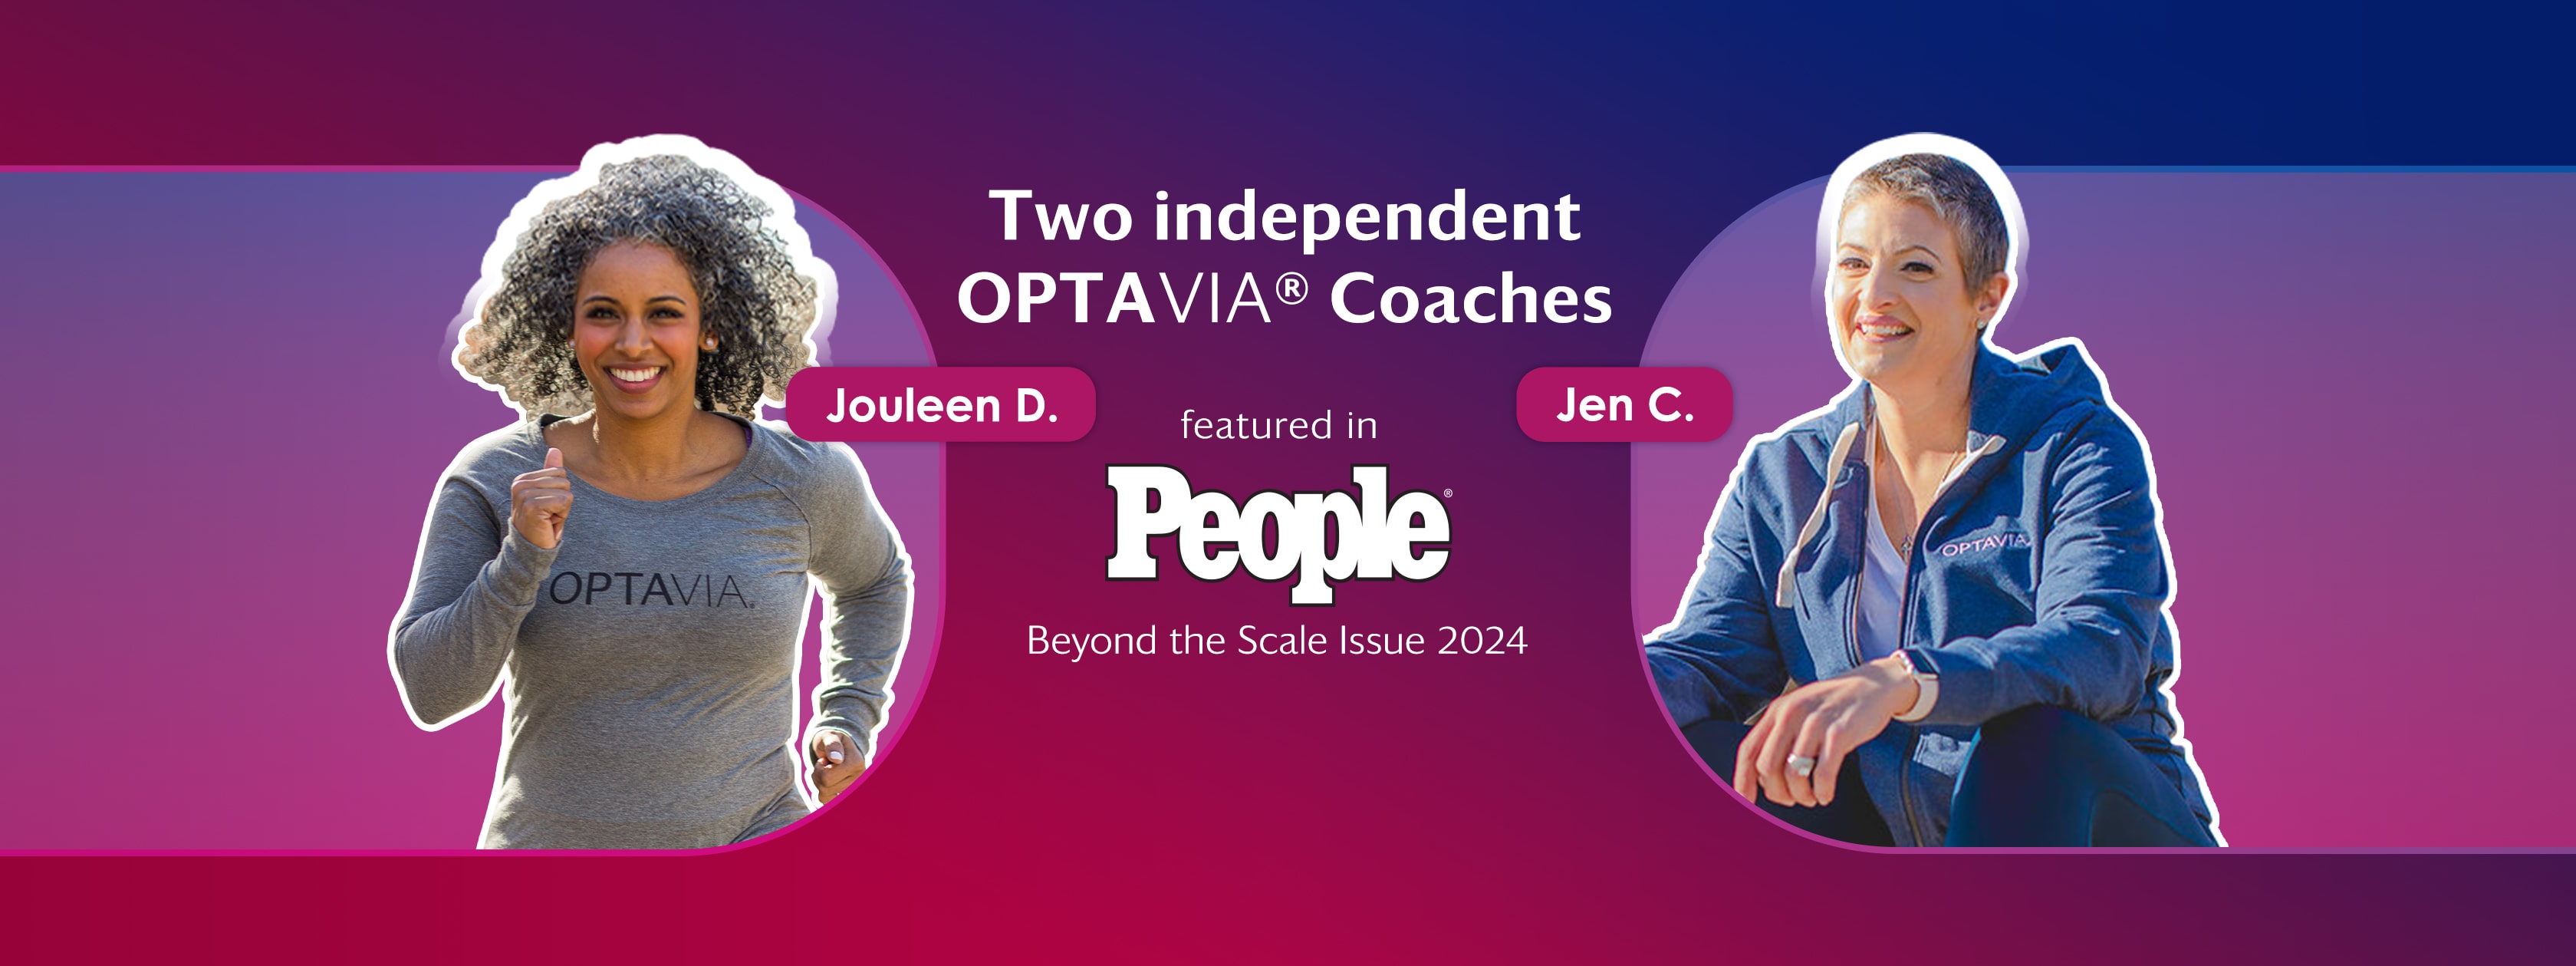 Two independent Optavia coaches, Jouleen D. and Jen C., featured in People beyond the scale issue, 2024.